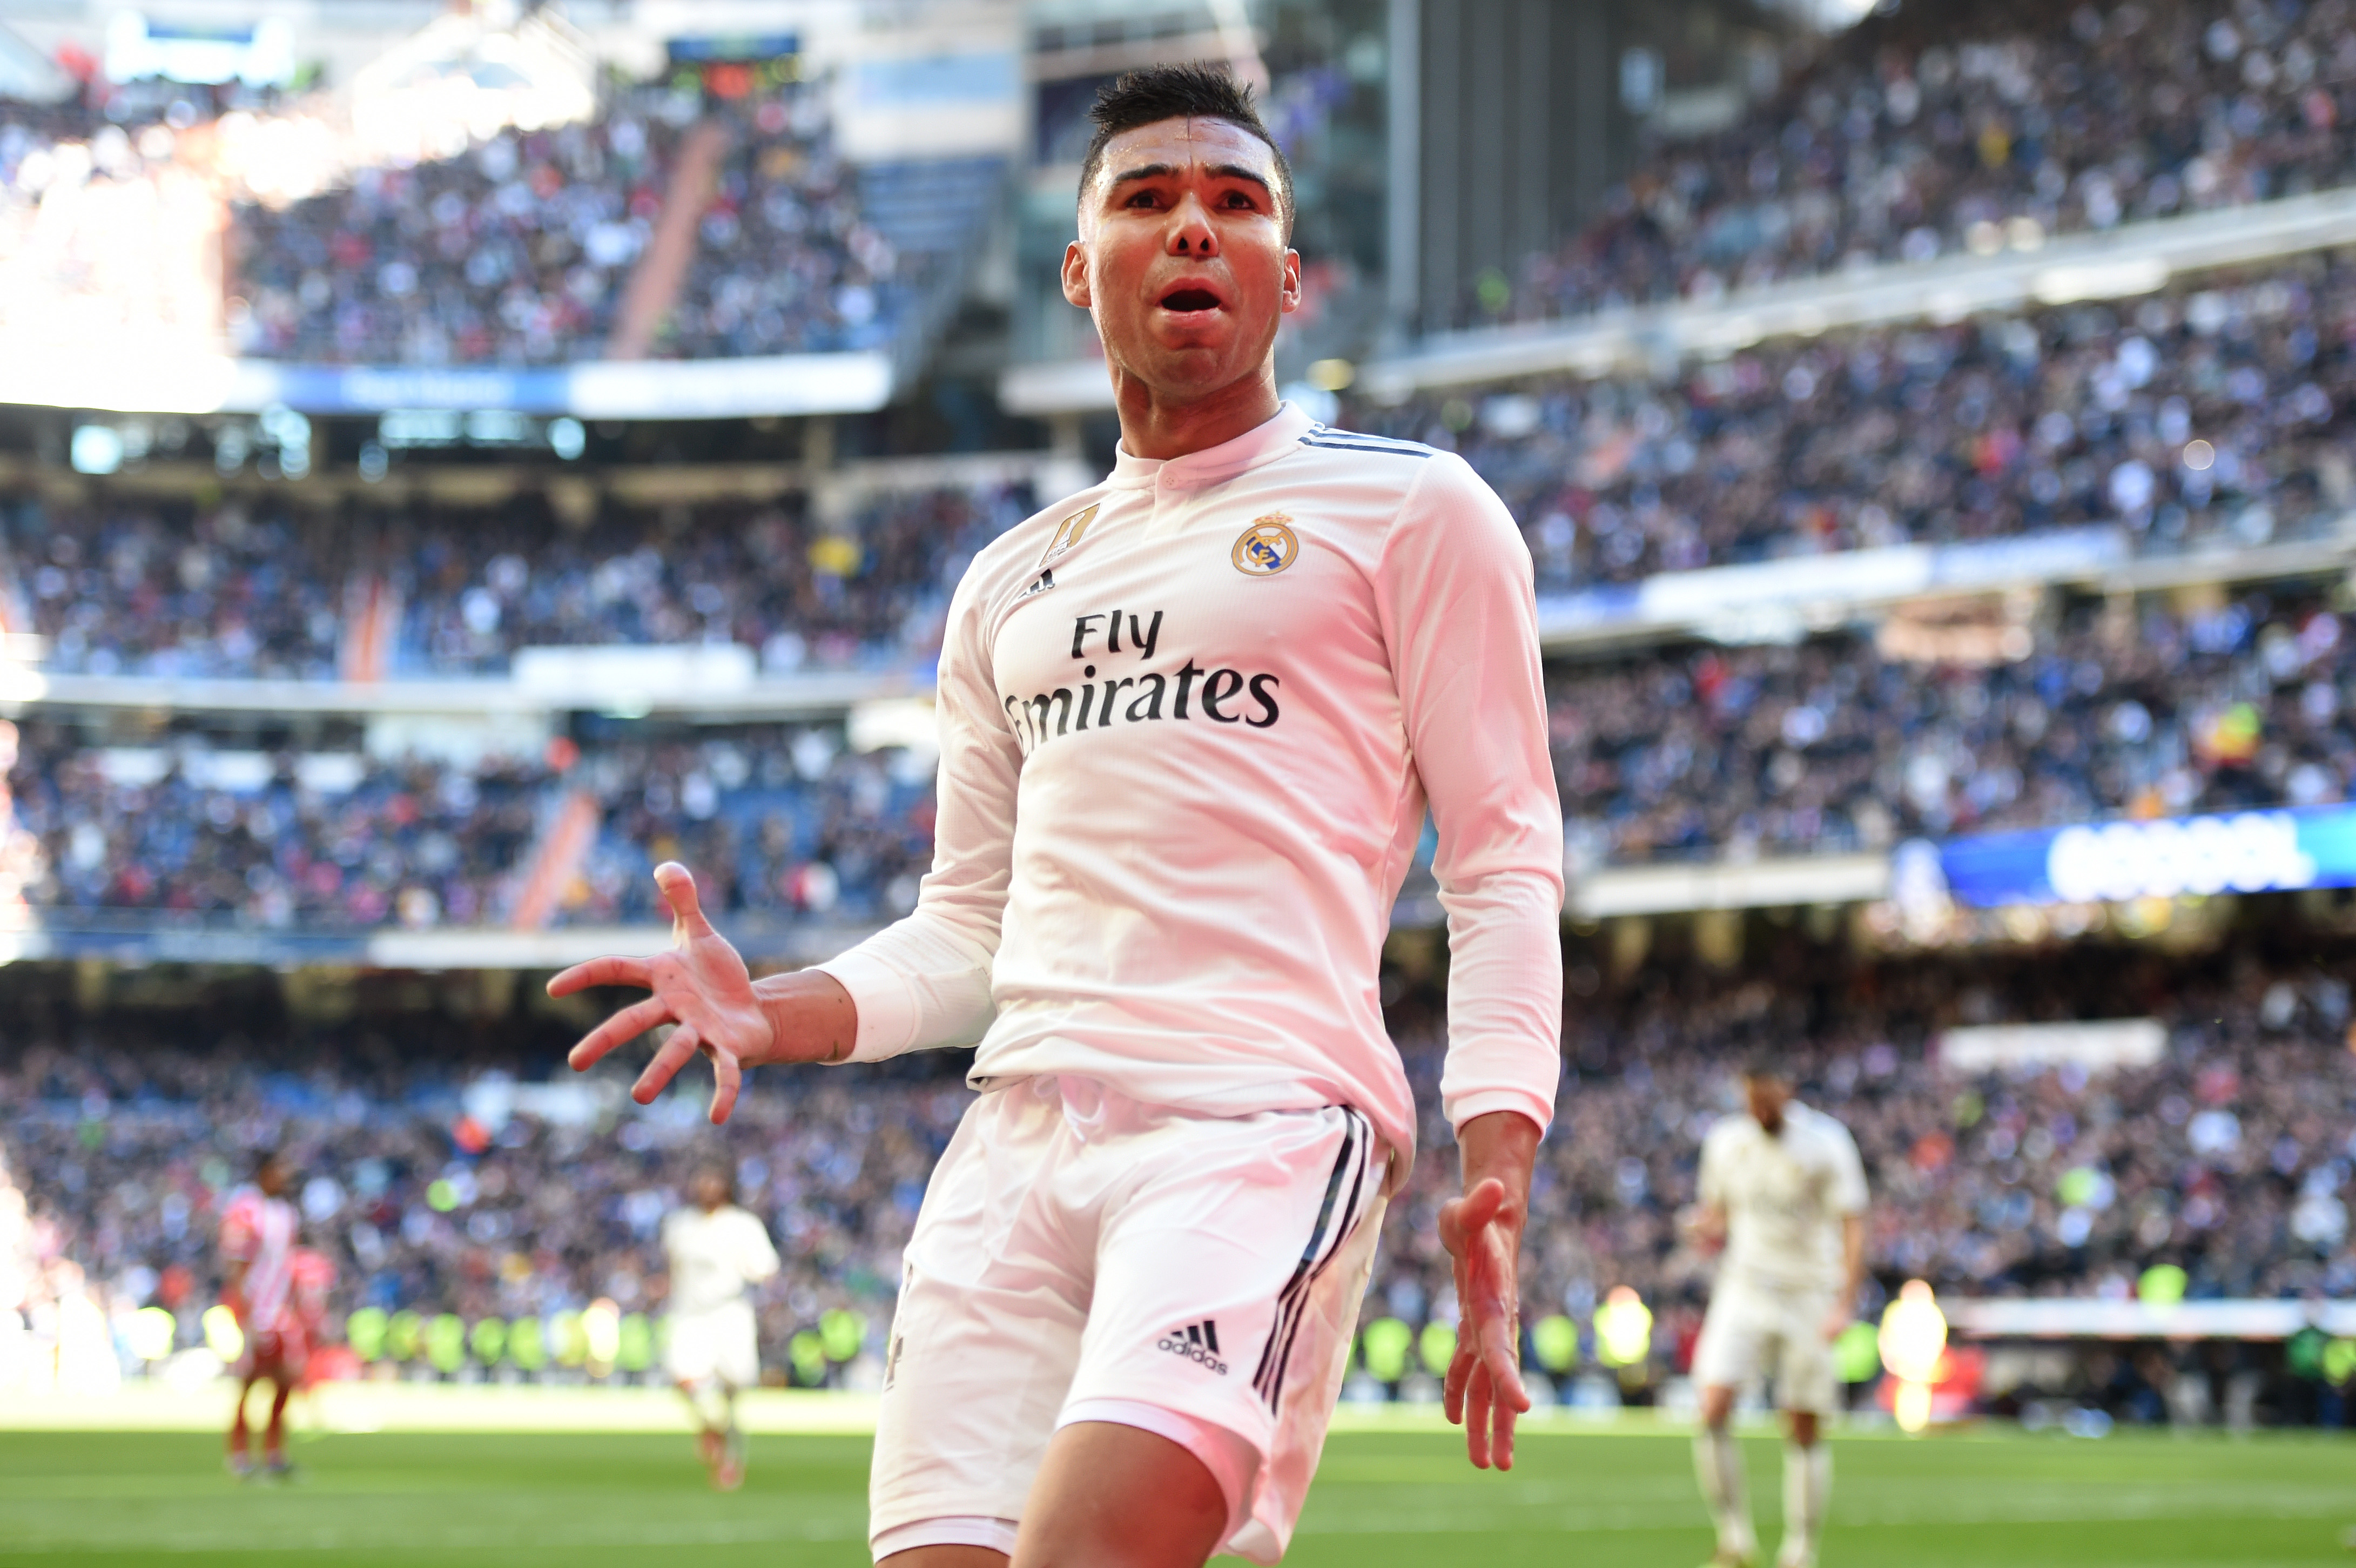 Can Casemiro be the dominant force in midfield for Real Madrid?(Photo by Denis Doyle/Getty Images)